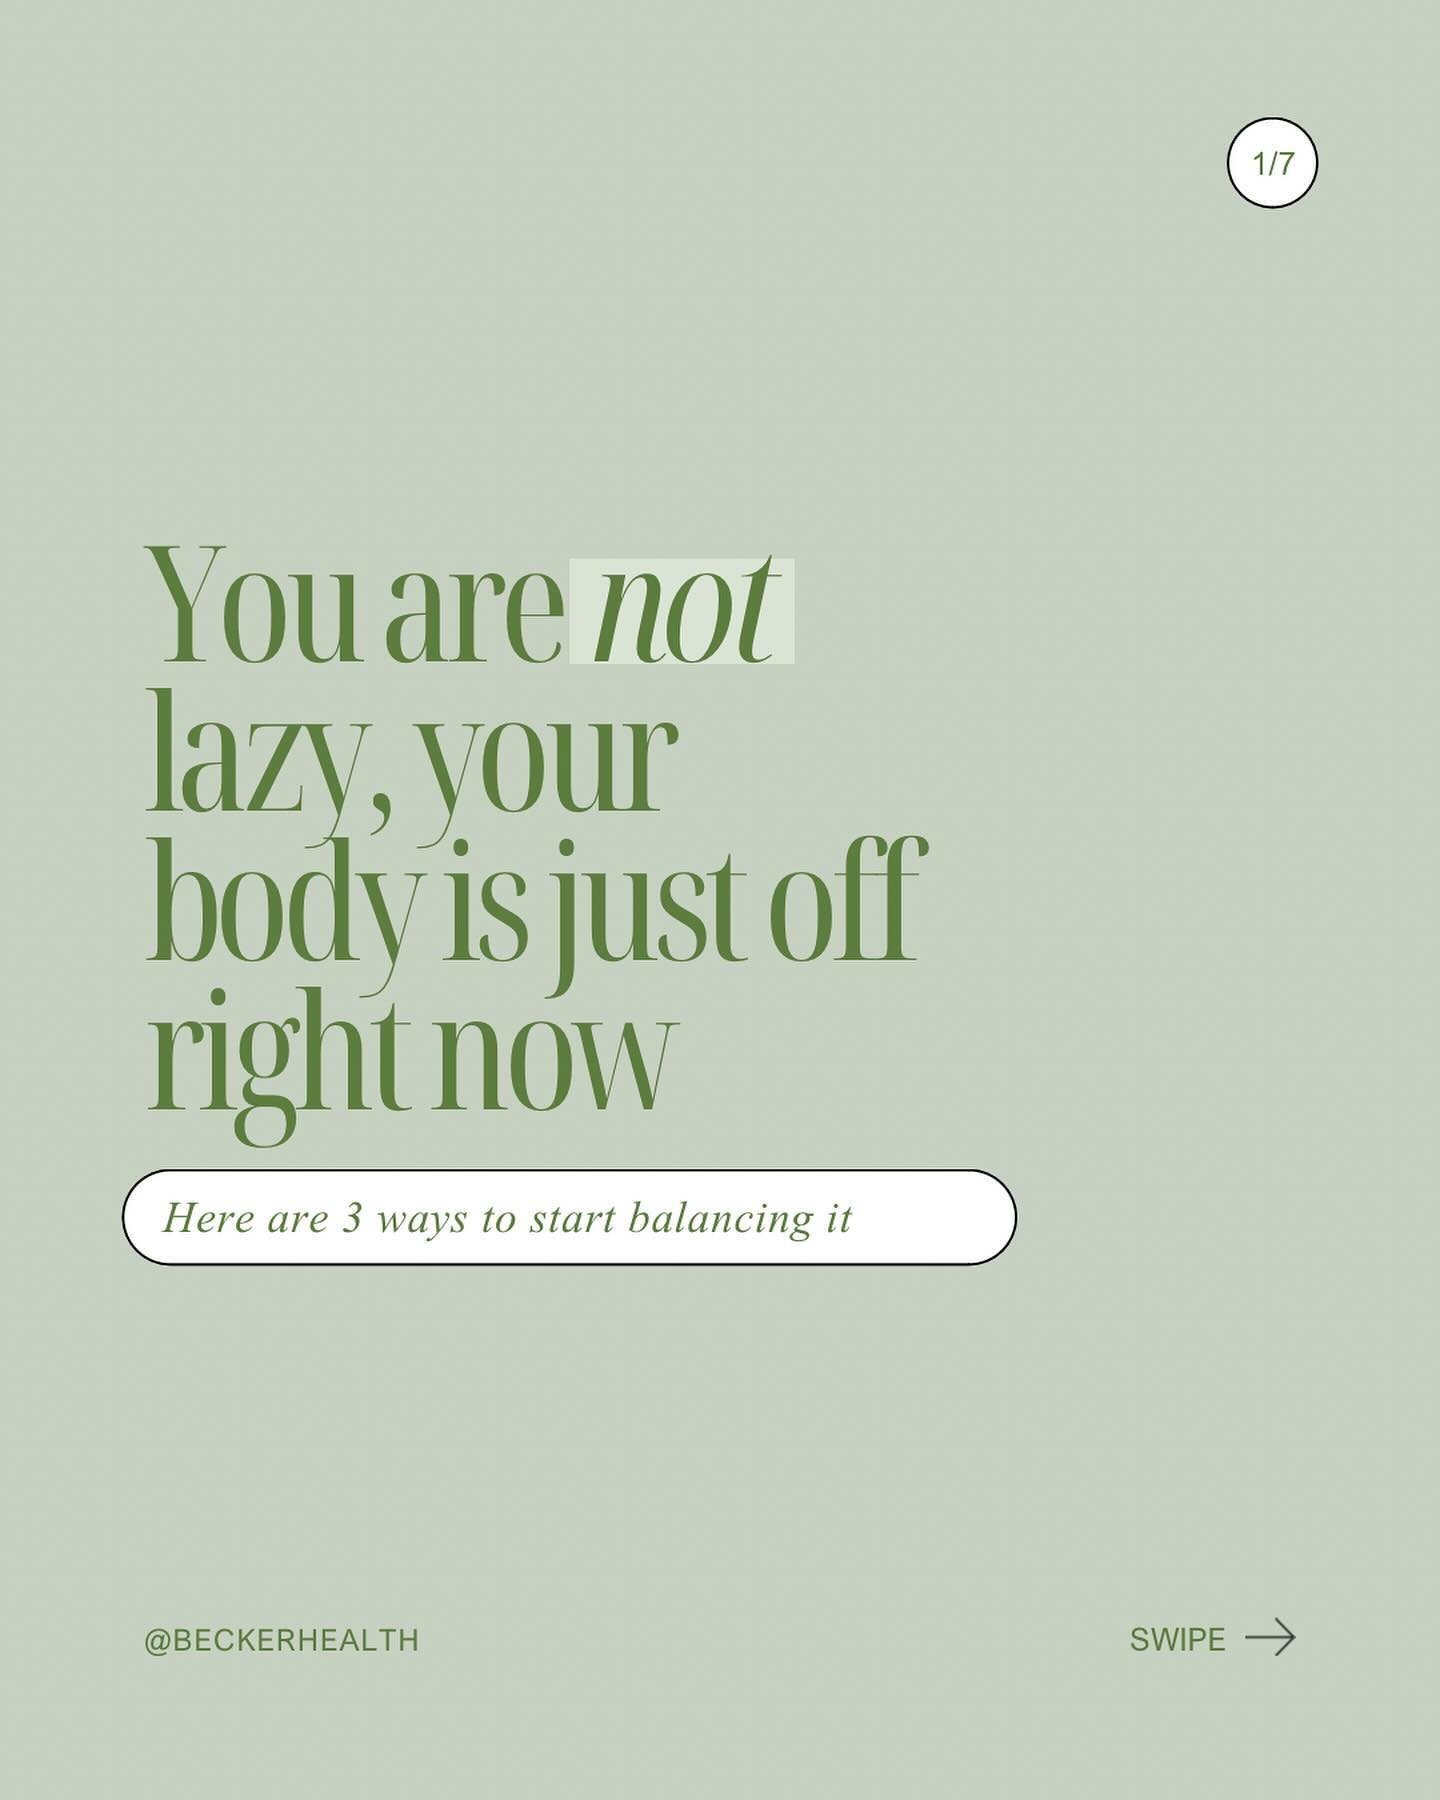 I literally don&rsquo;t think lazy exists. If you feel &ldquo;lazy&rdquo;, it&rsquo;s NOT your fault. Your body just needs something and I can help you find what it needs! 

DM me the word ENERGY for a free protocol with even more tips inside.